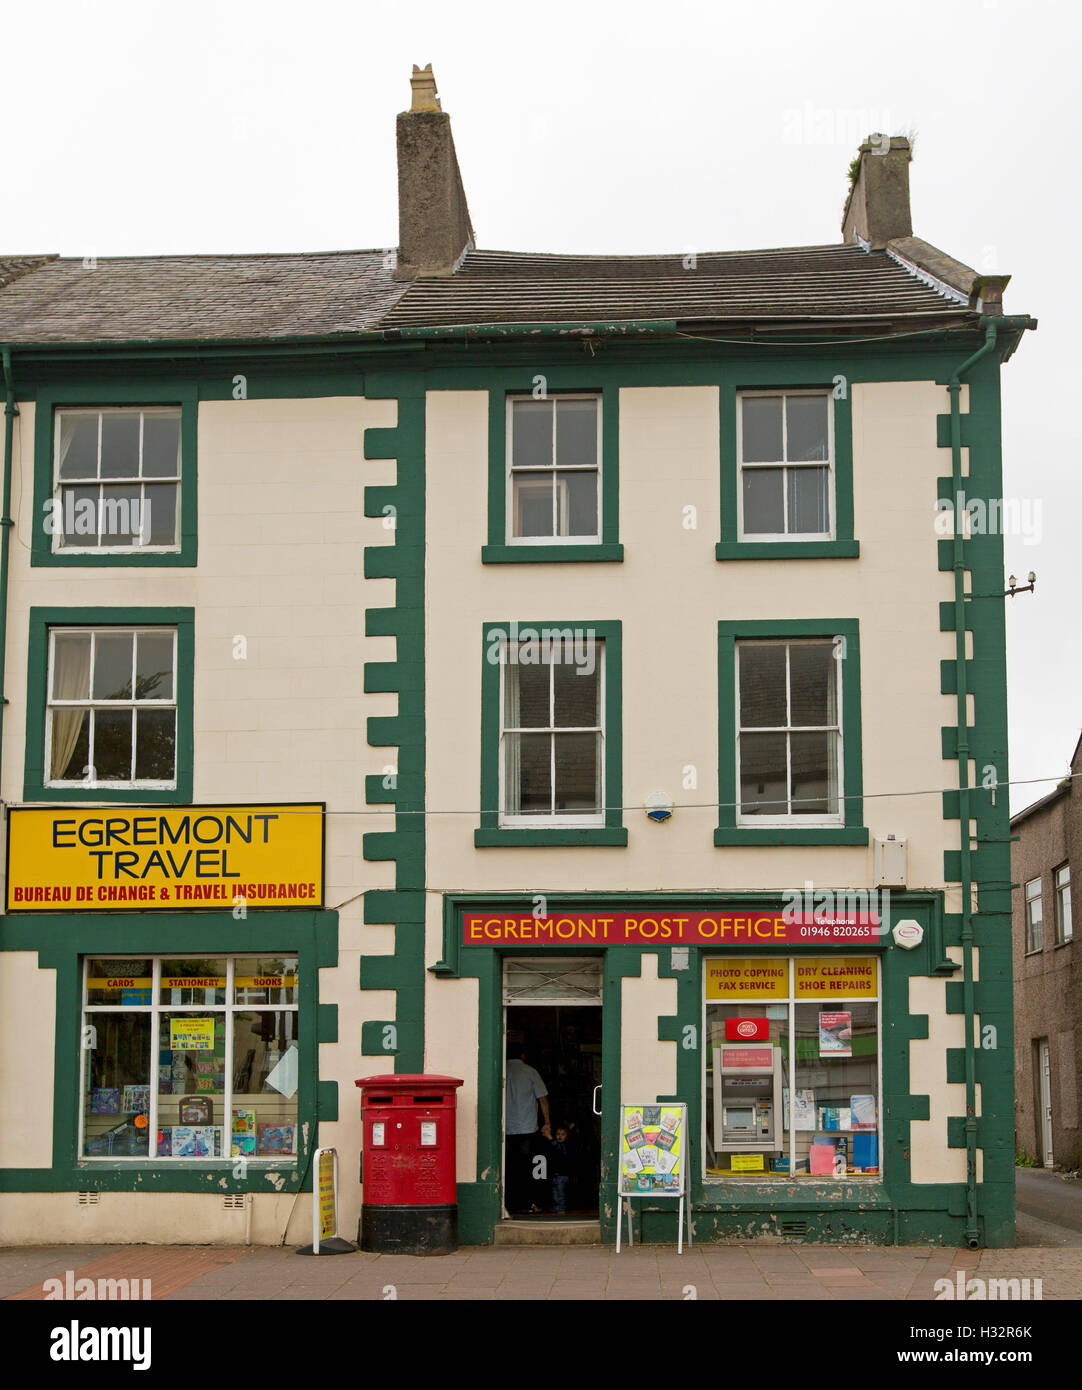 Old post office and adjacent shop, three stories high, painted green and cream, in main street of English town of Egremont Stock Photo